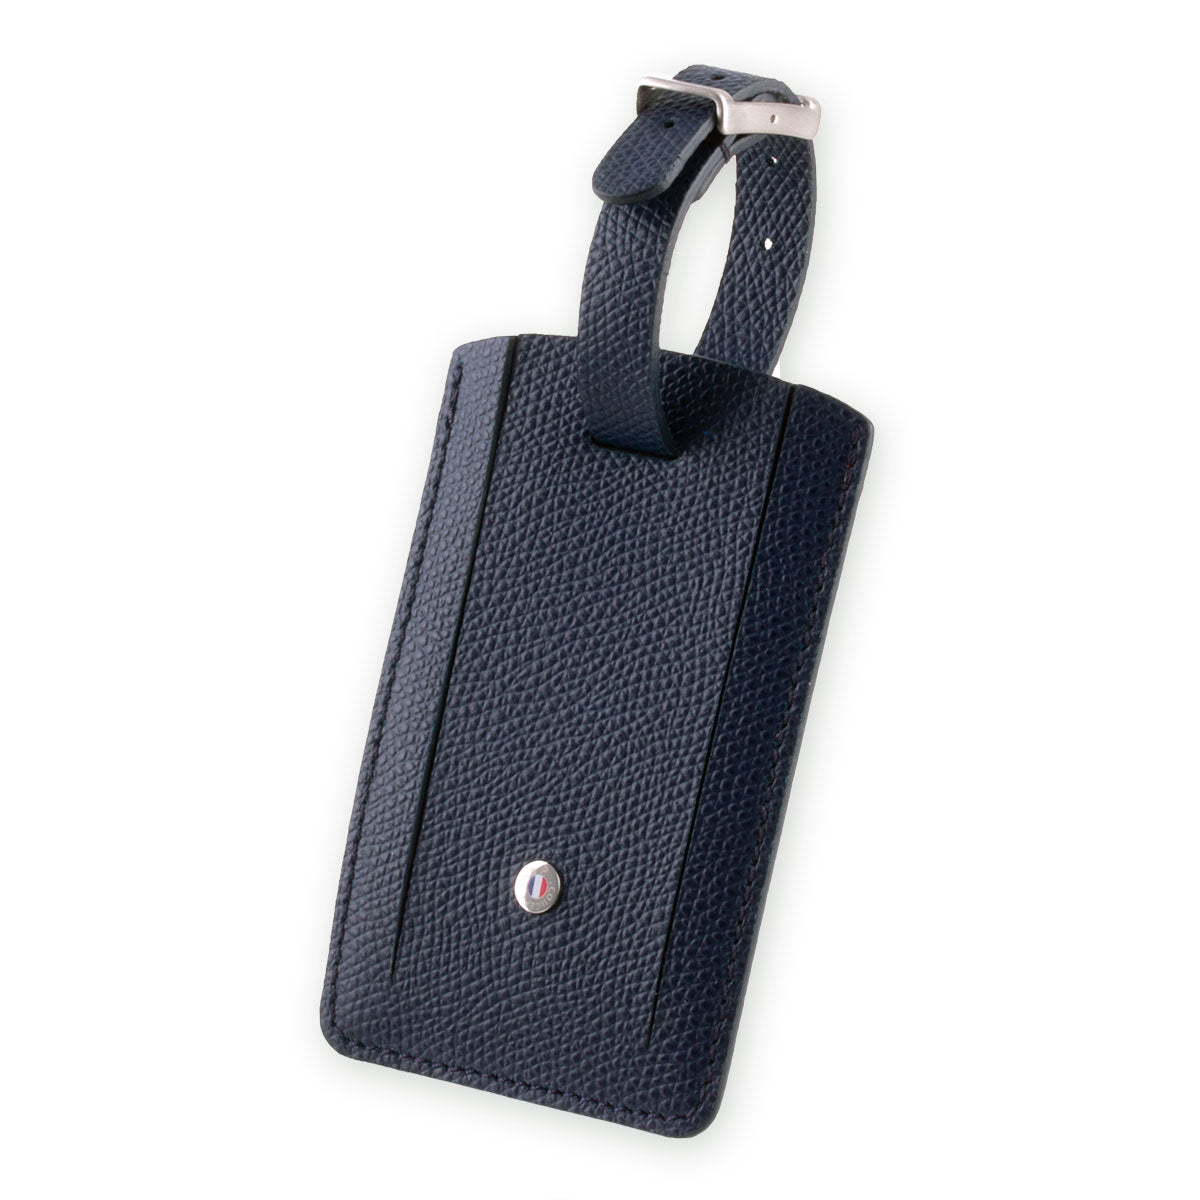 Leather luggage Tag "Essential" - Grained calf (black, blue, green, brown, orange...)